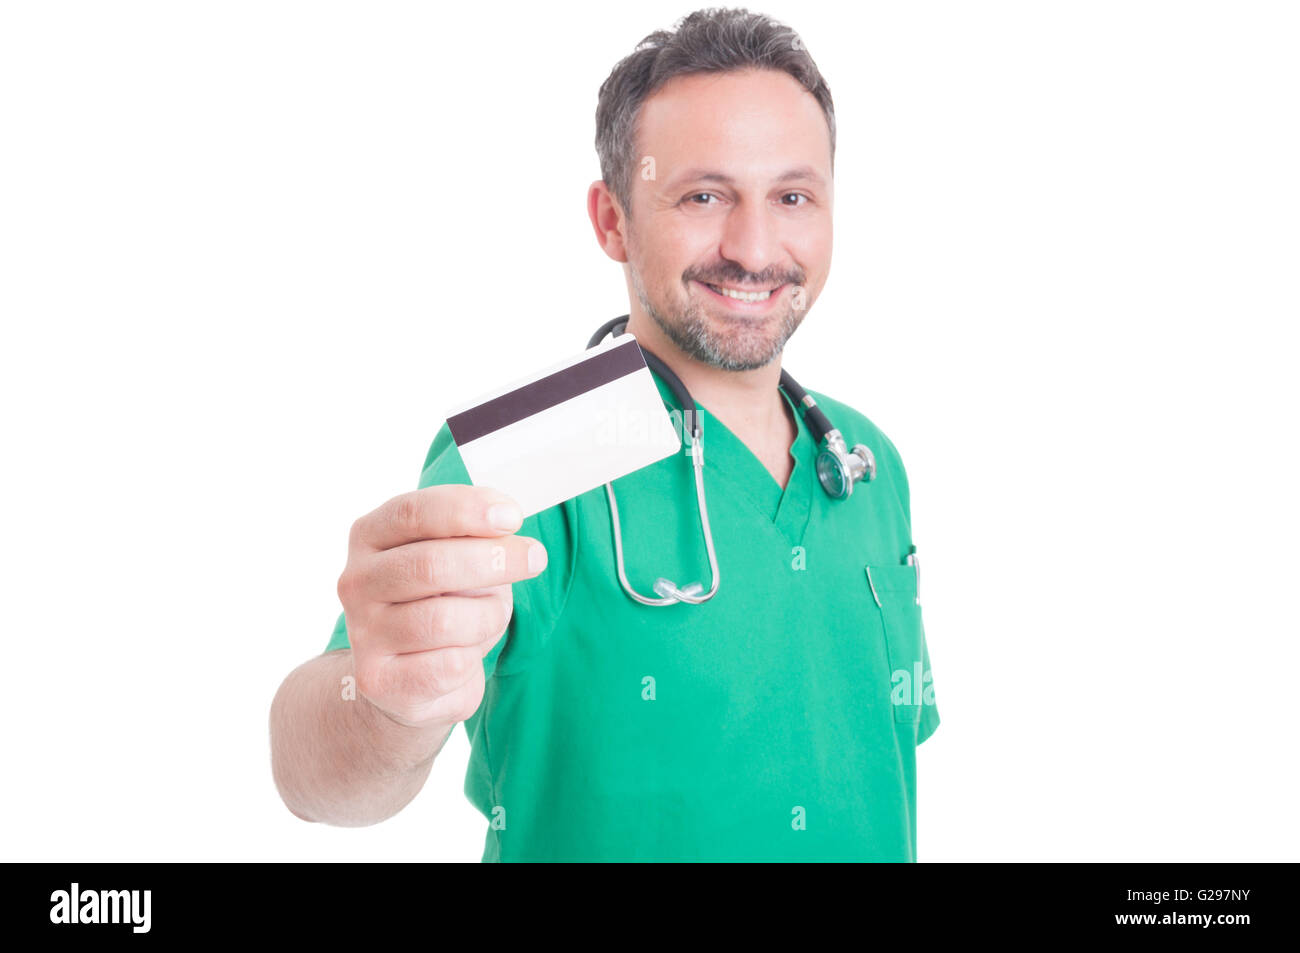 Pay secure using credit card for medical services. Doctor holding creditcard Stock Photo